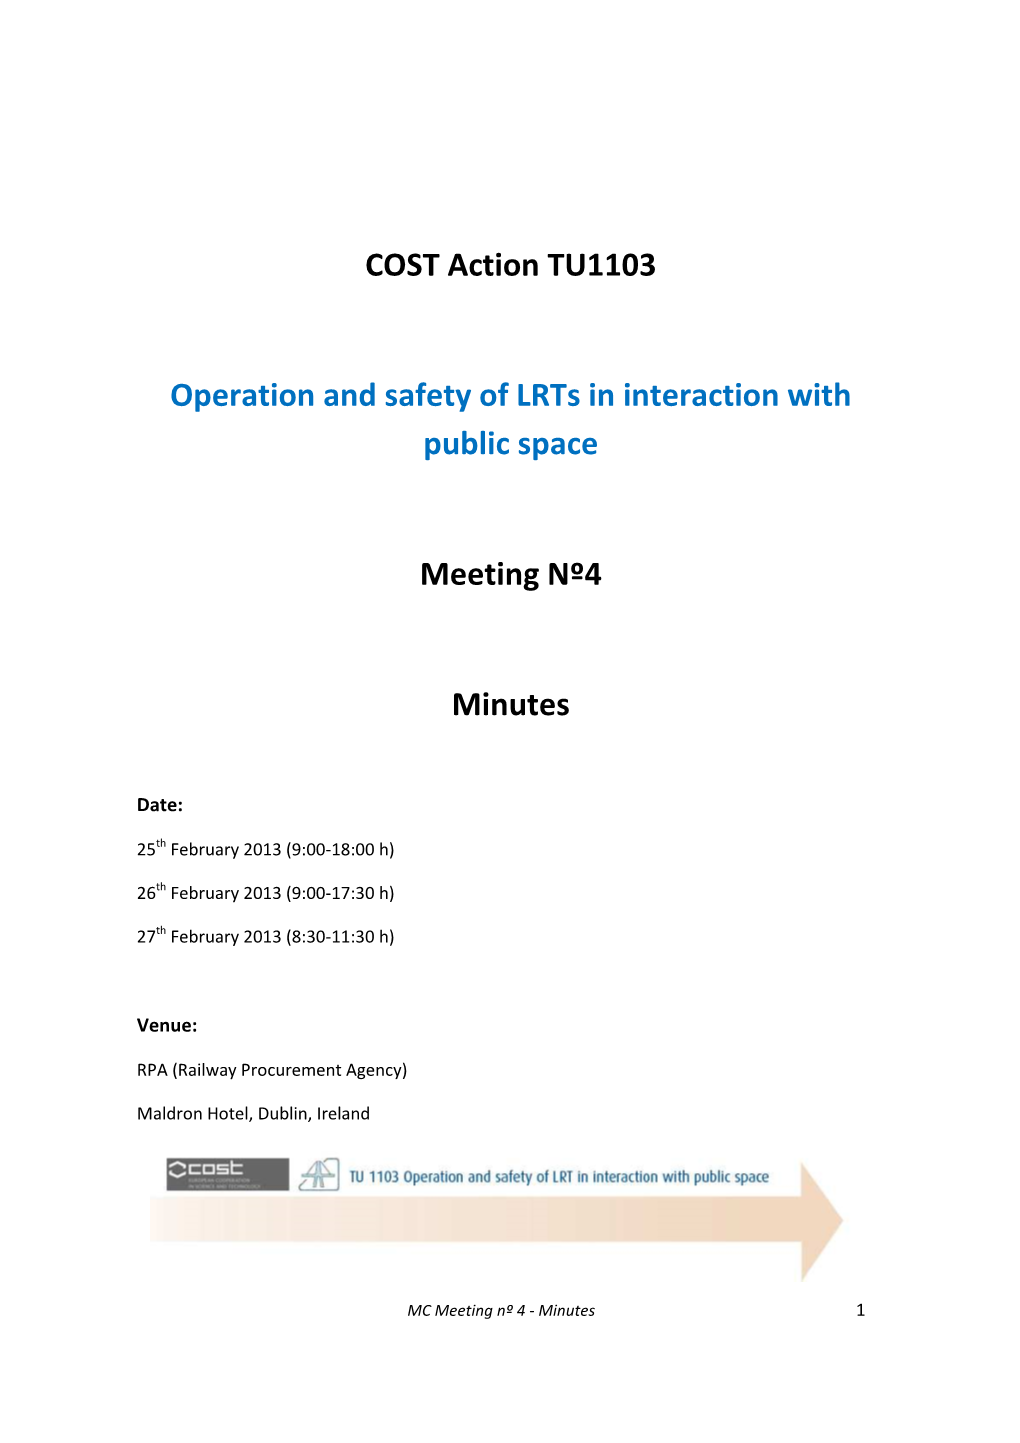 COST Action TU1103 Operation and Safety of Lrts in Interaction with Public Space Meeting Nº4 Minutes